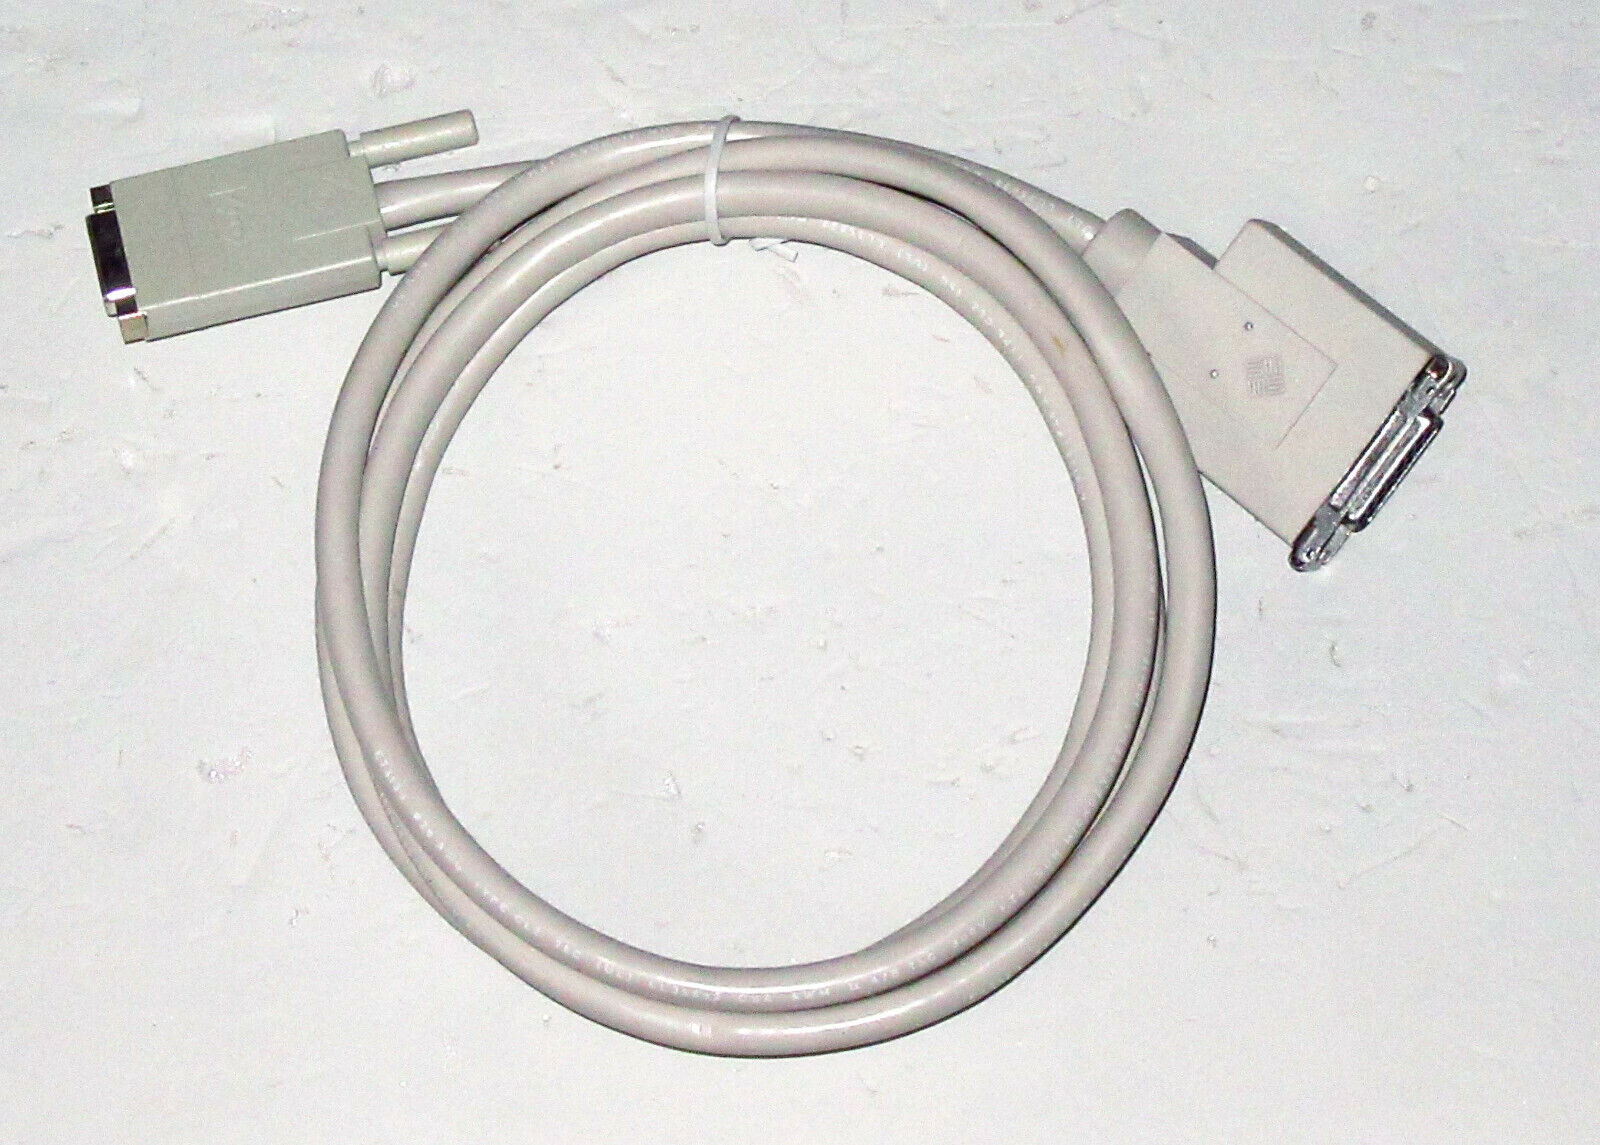 Original Sun MII To AUI Network Adapter Cable 530-2021 -- Clean, Works Great